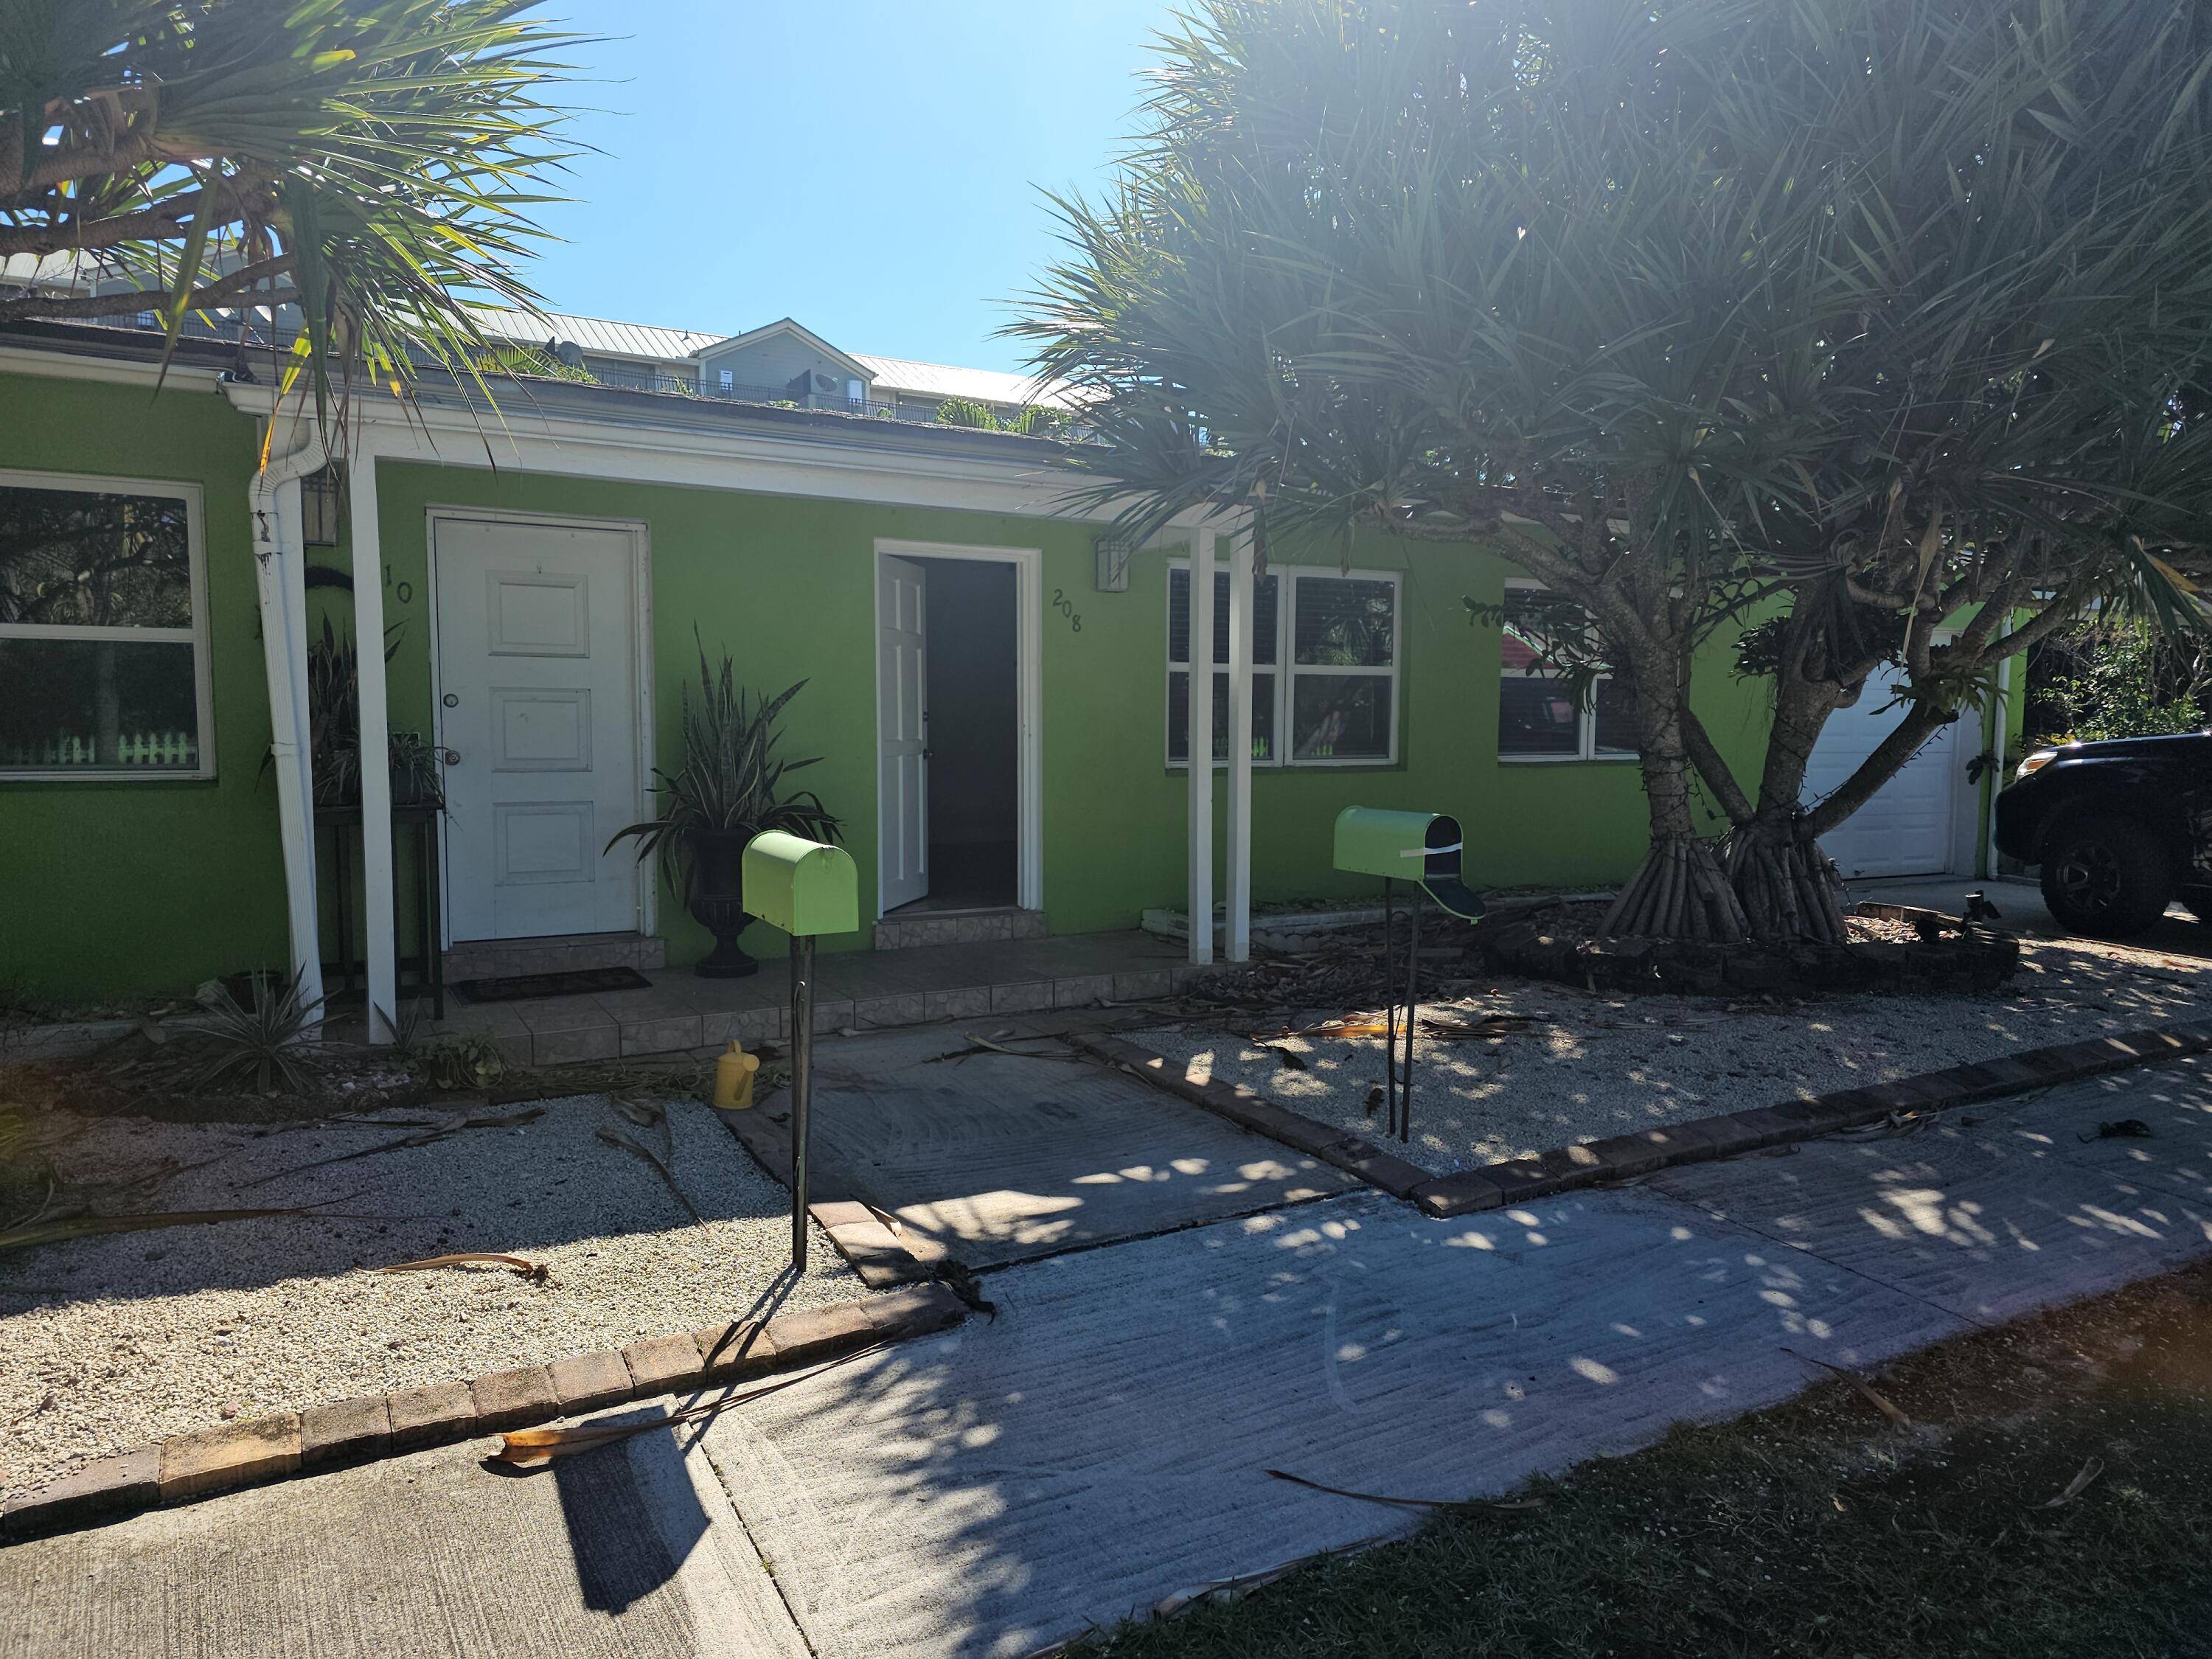 NEWLY RENOVATED APARTMENT FOR LEASE ON ANNUAL BASIS, SCREENED IN PATIO, LARGE YARD, ENCLOSGED GARAGE WITH AUTO DOOR OPENER, ACROSS THE STREET FRON INTRACOASTAL WATERWAY, LESS THAN 1 MILE FROM ...